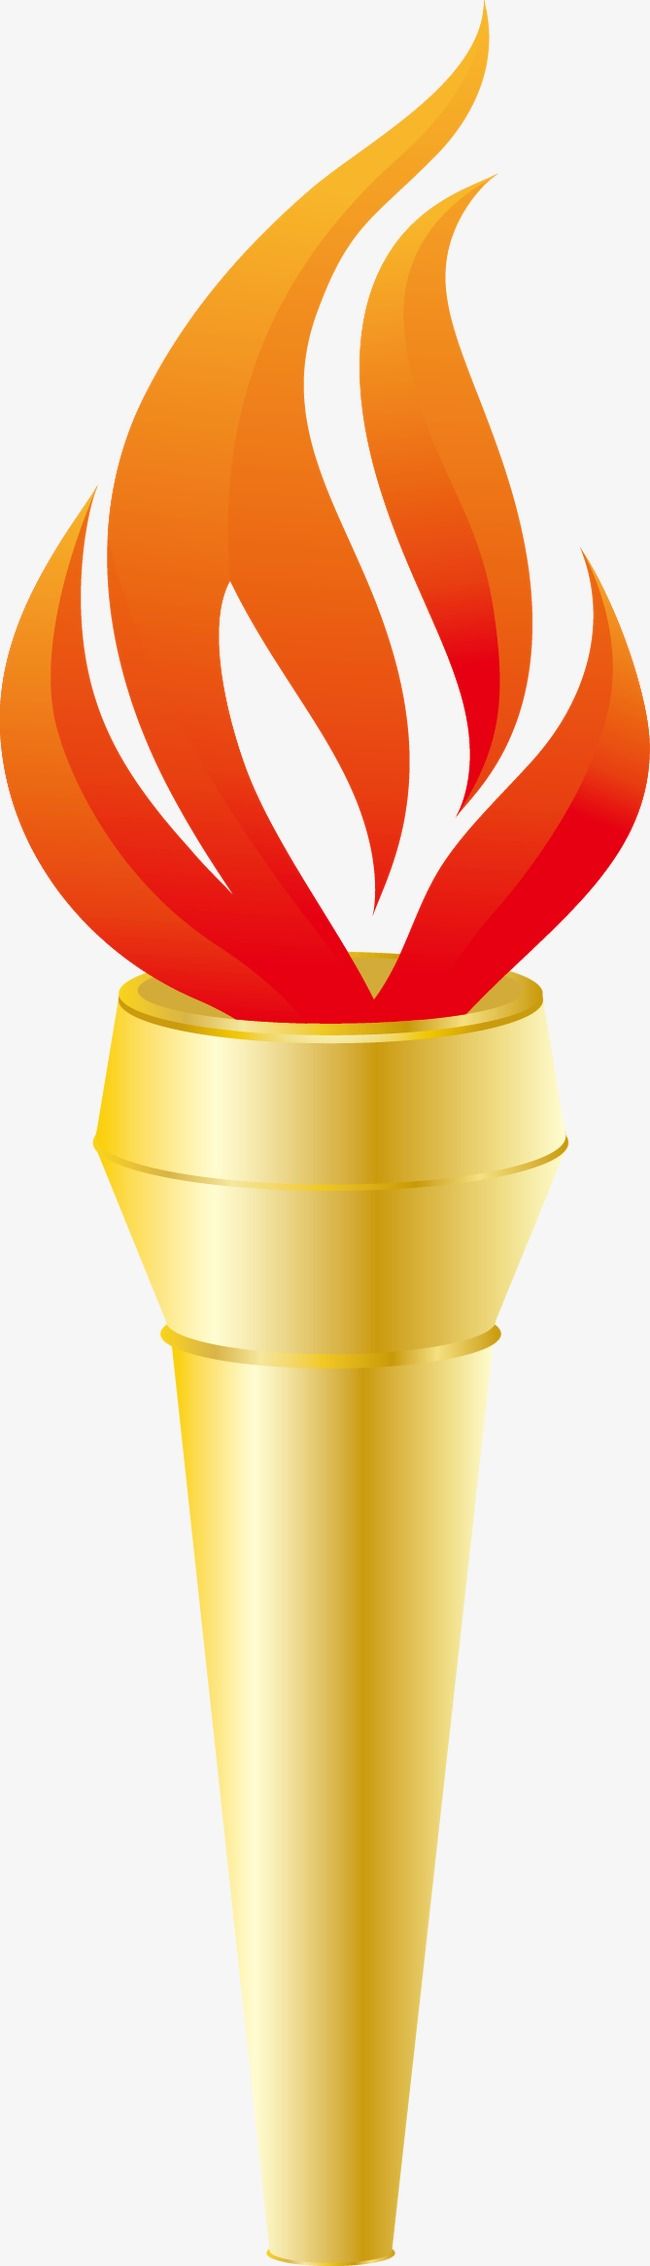 Olympic Torch Royalty Free Stock SVG Vector and Clip Art - Clip Art Library